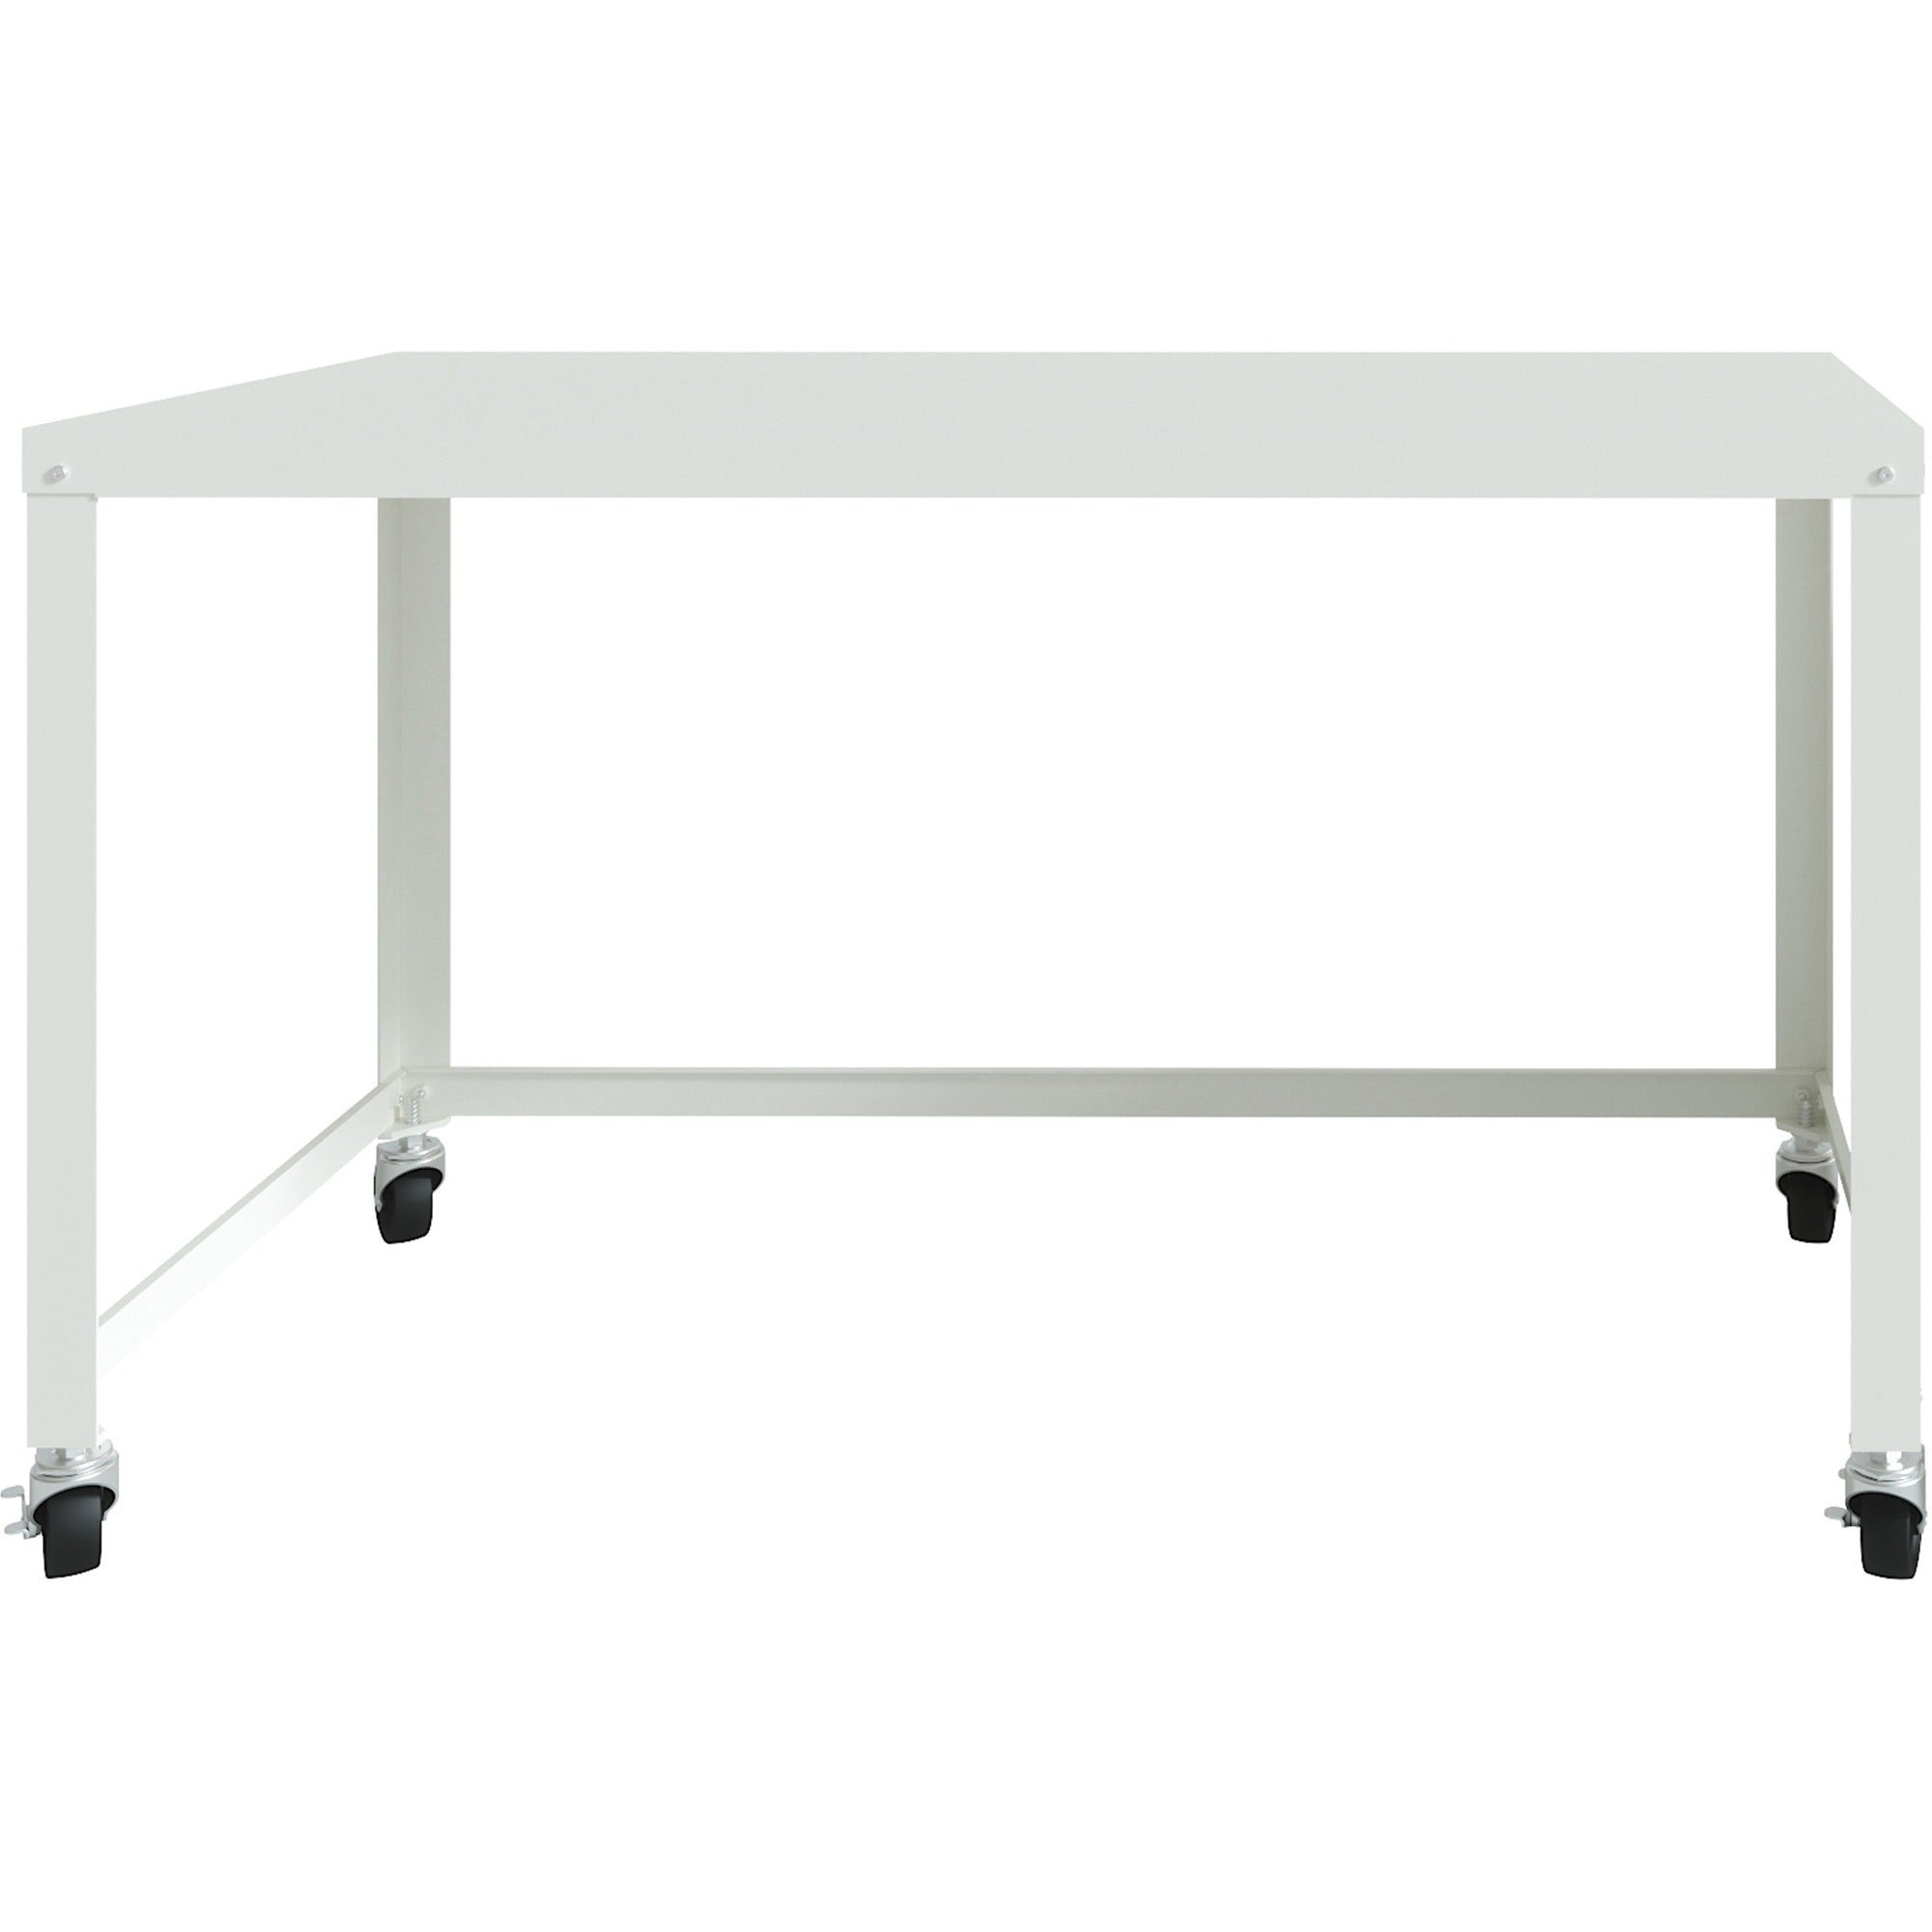 lorell-soho-personal-mobile-desk-for-table-toprectangle-top-x-48-table-top-width-x-23-table-top-depth-2950-height-assembly-required-white-1-each_llr34418 - 3